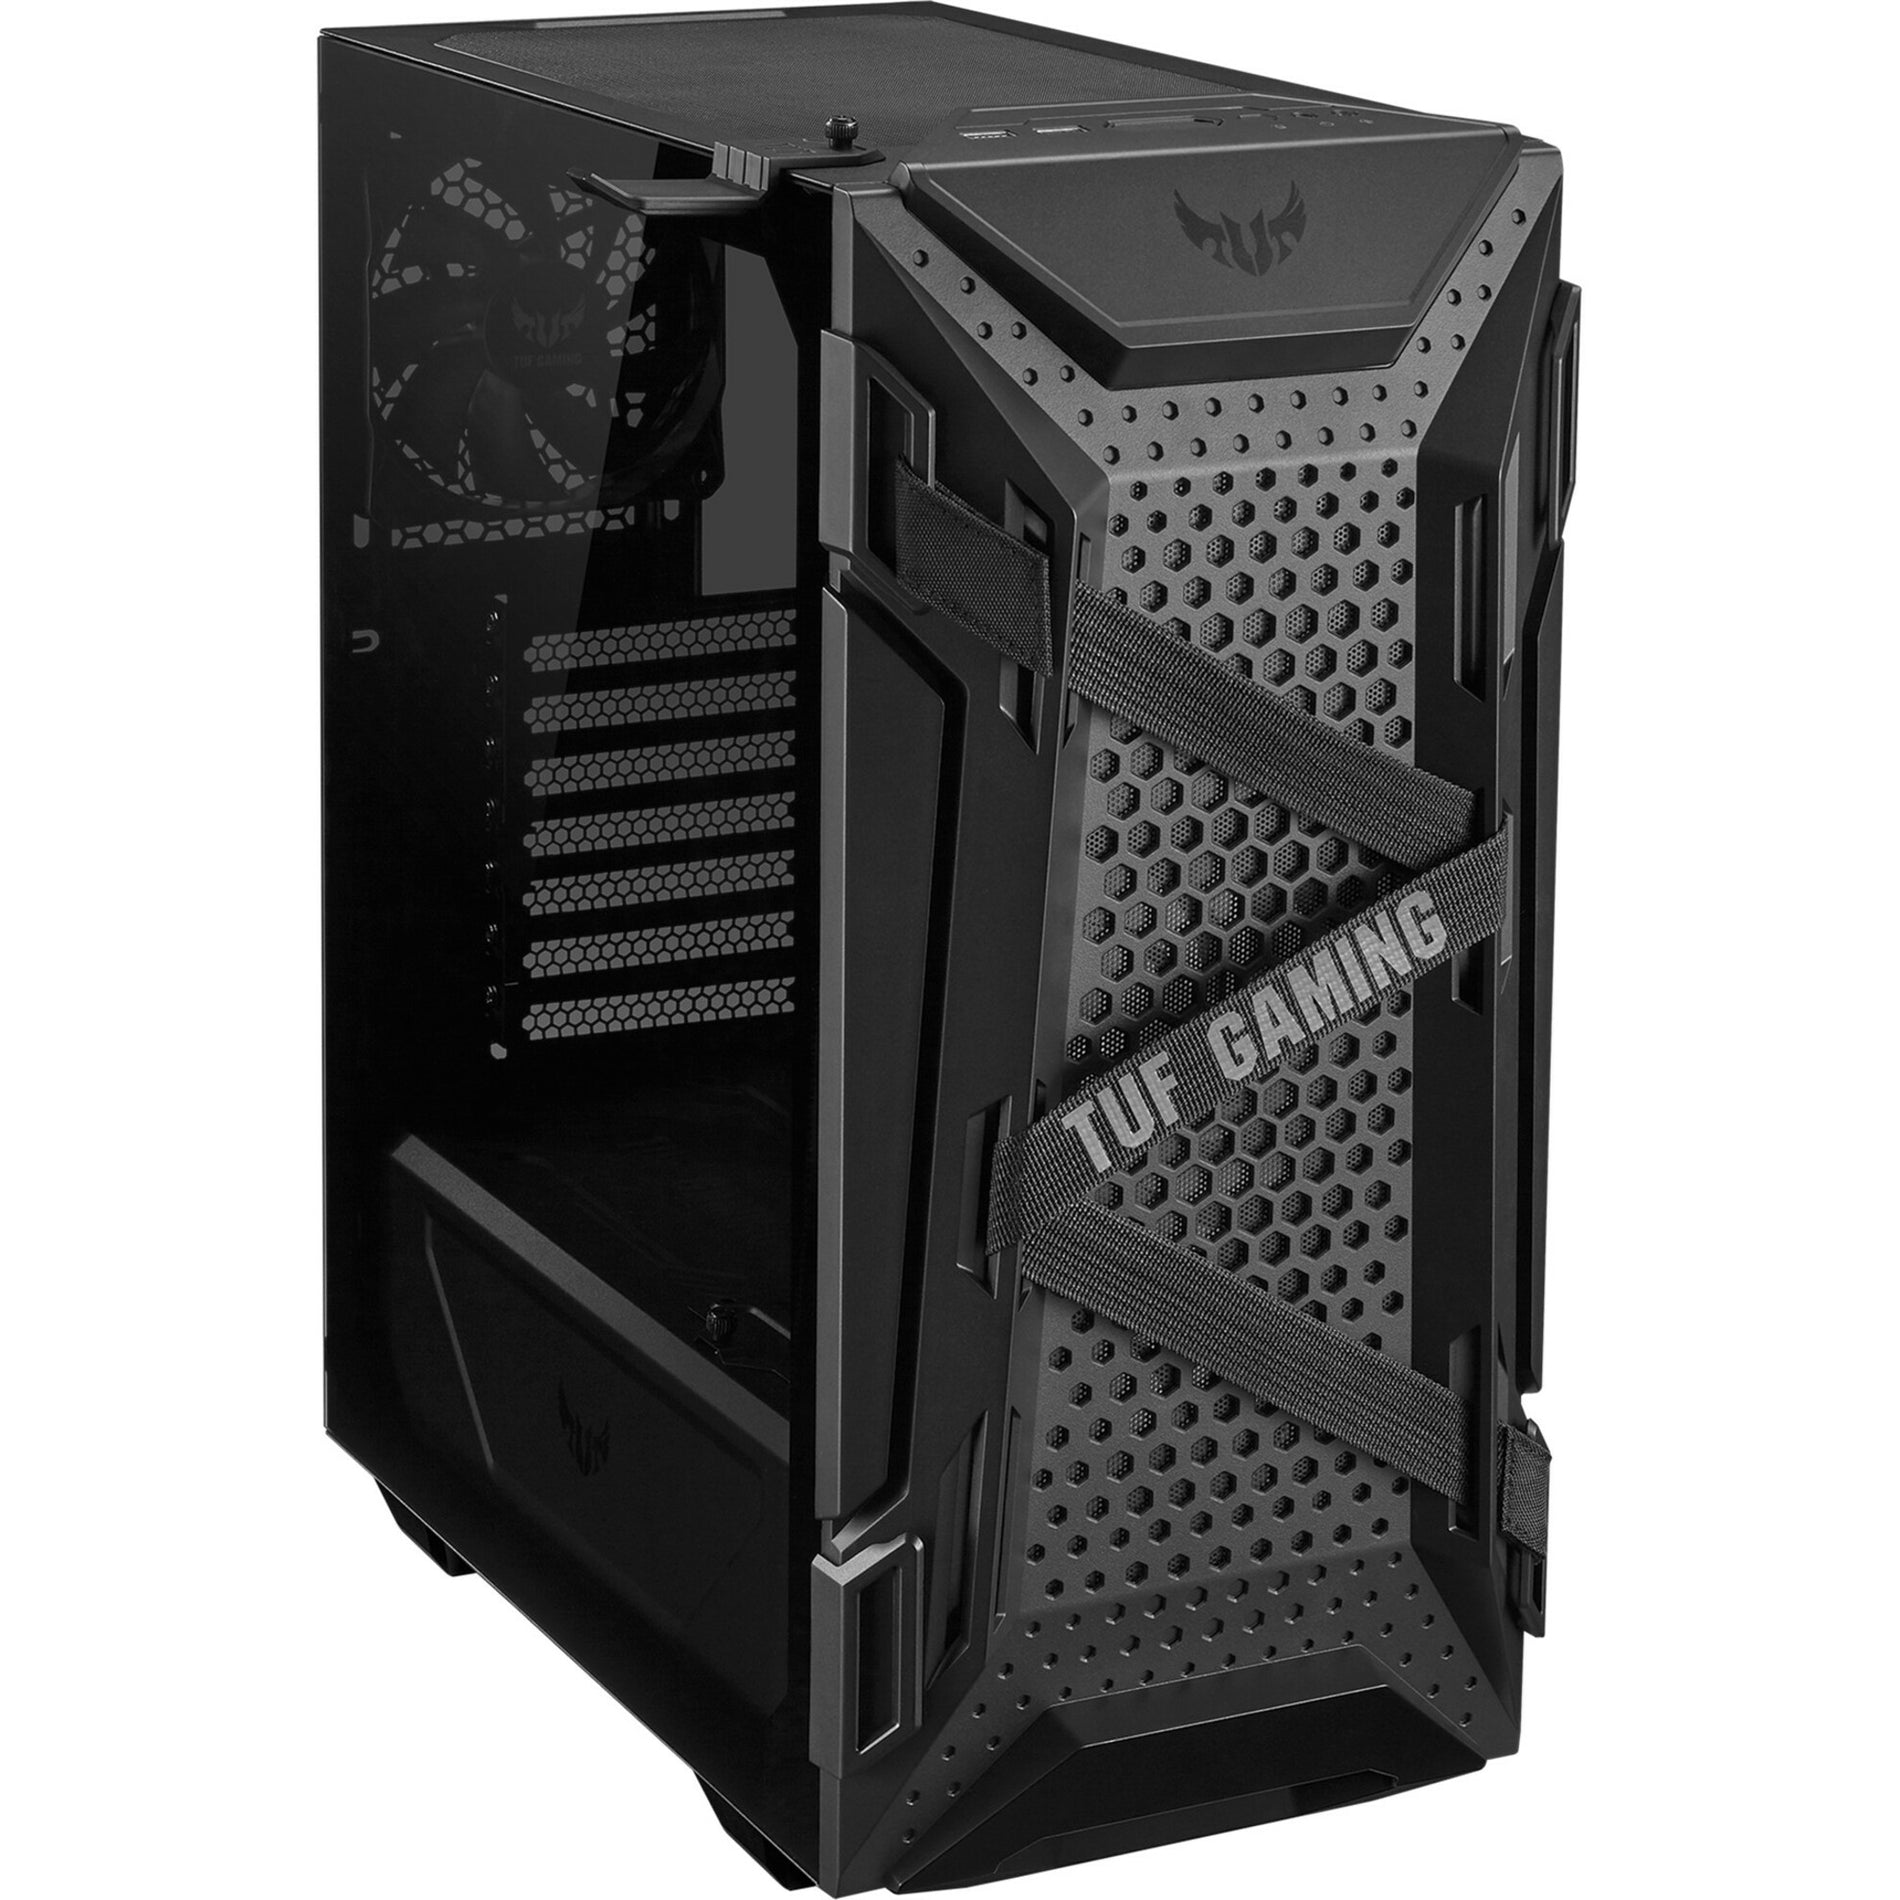 TUF GT301 GT301TUFGAMCASE Gaming Computer Case, Black Tempered Glass, 4.72" Fans, ATX Supported